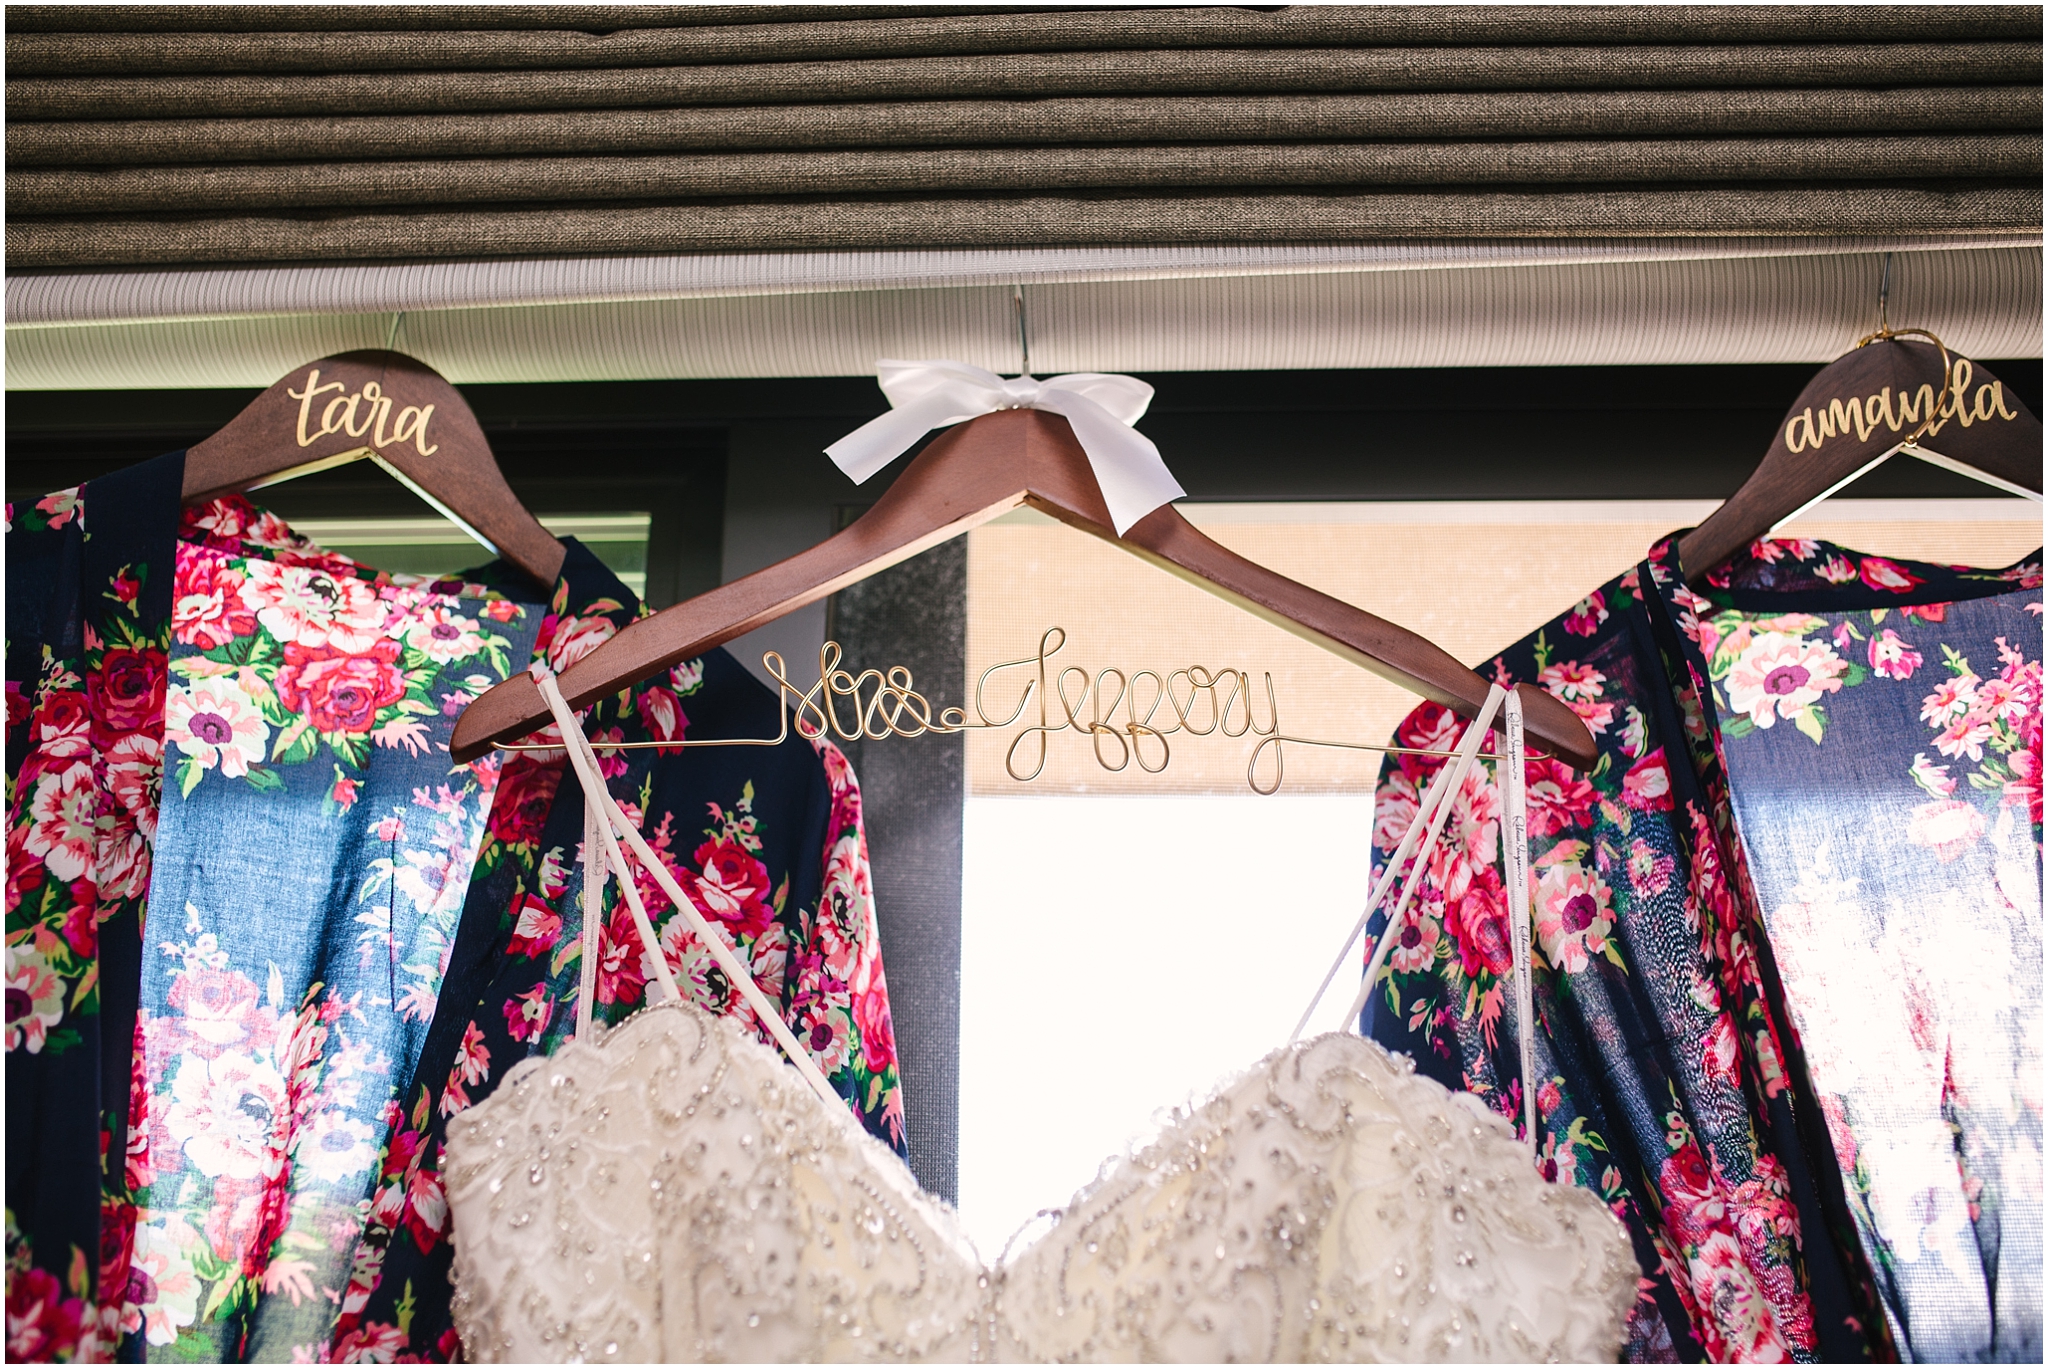 Wedding dress with floral bridesmaid robes at Issaquah wedding